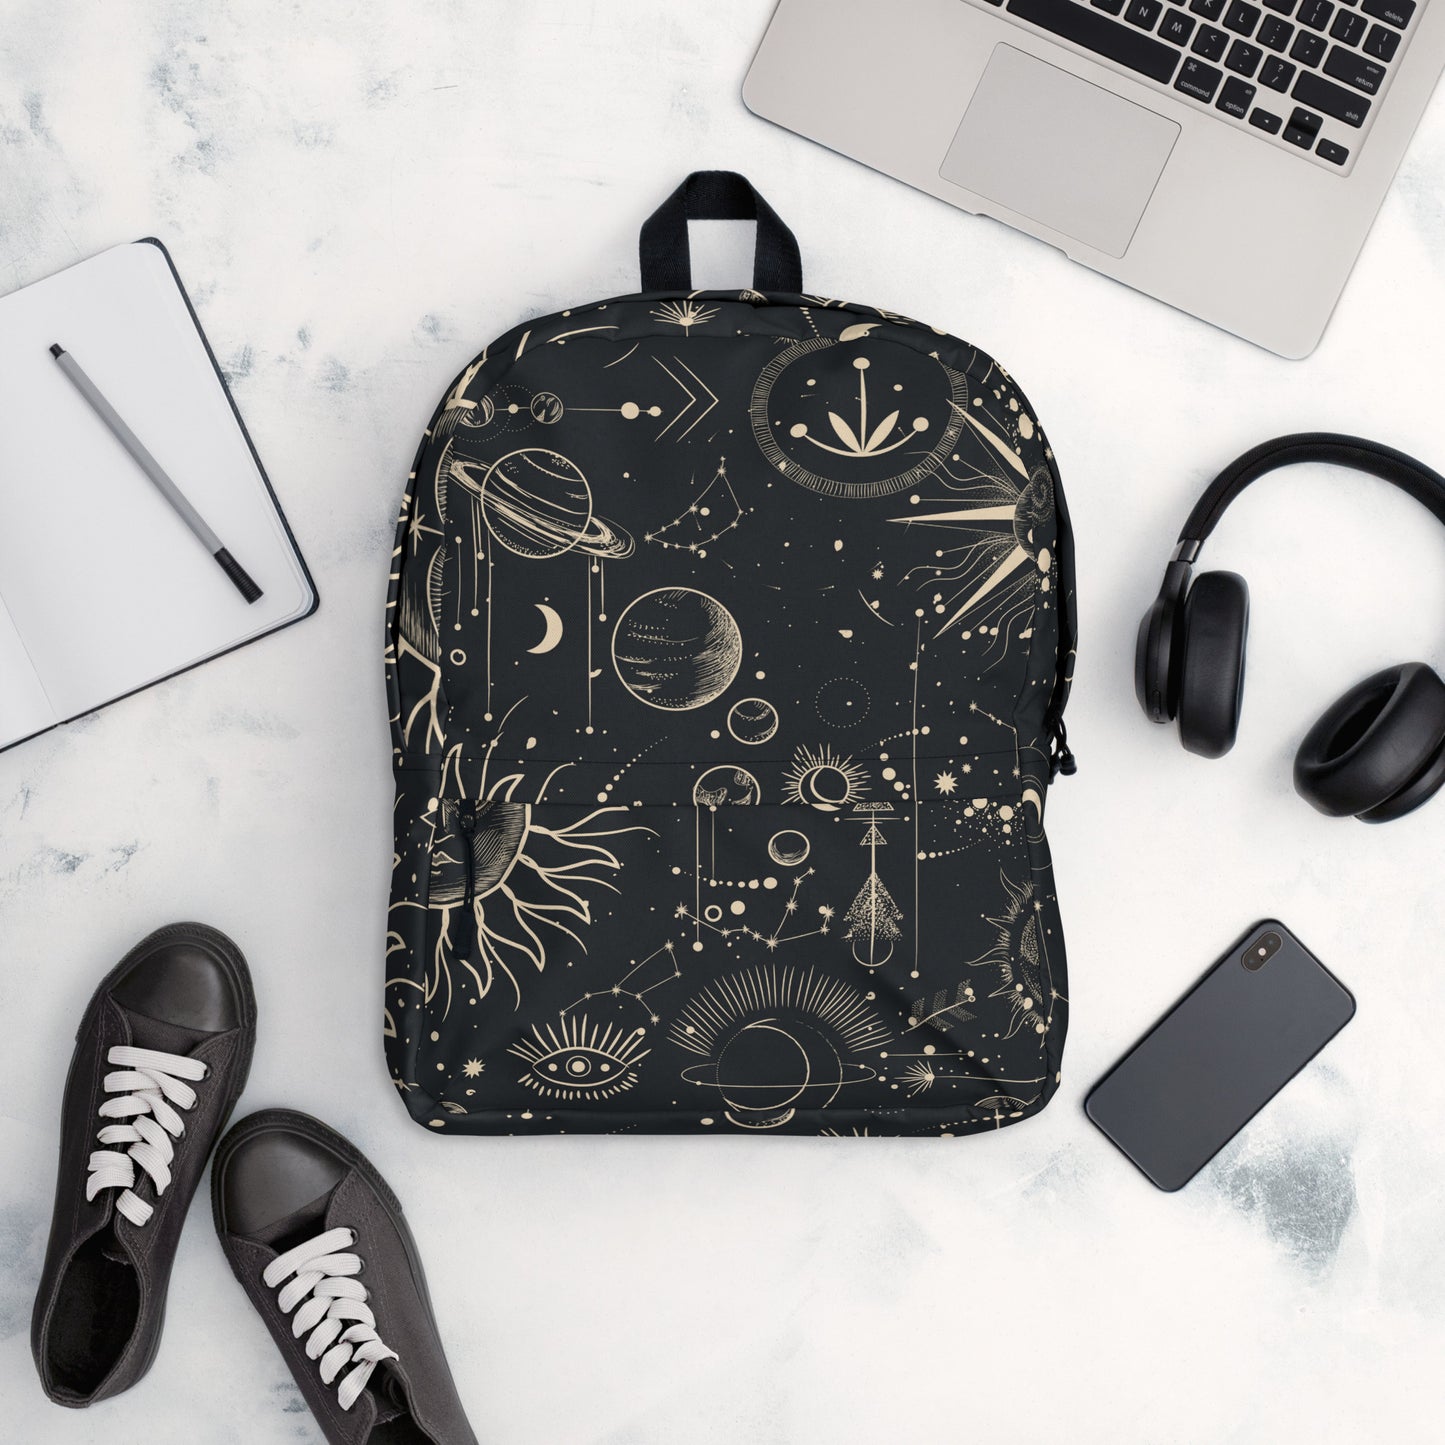 Constellation, Sun Moon Planets Outer Space Backpack